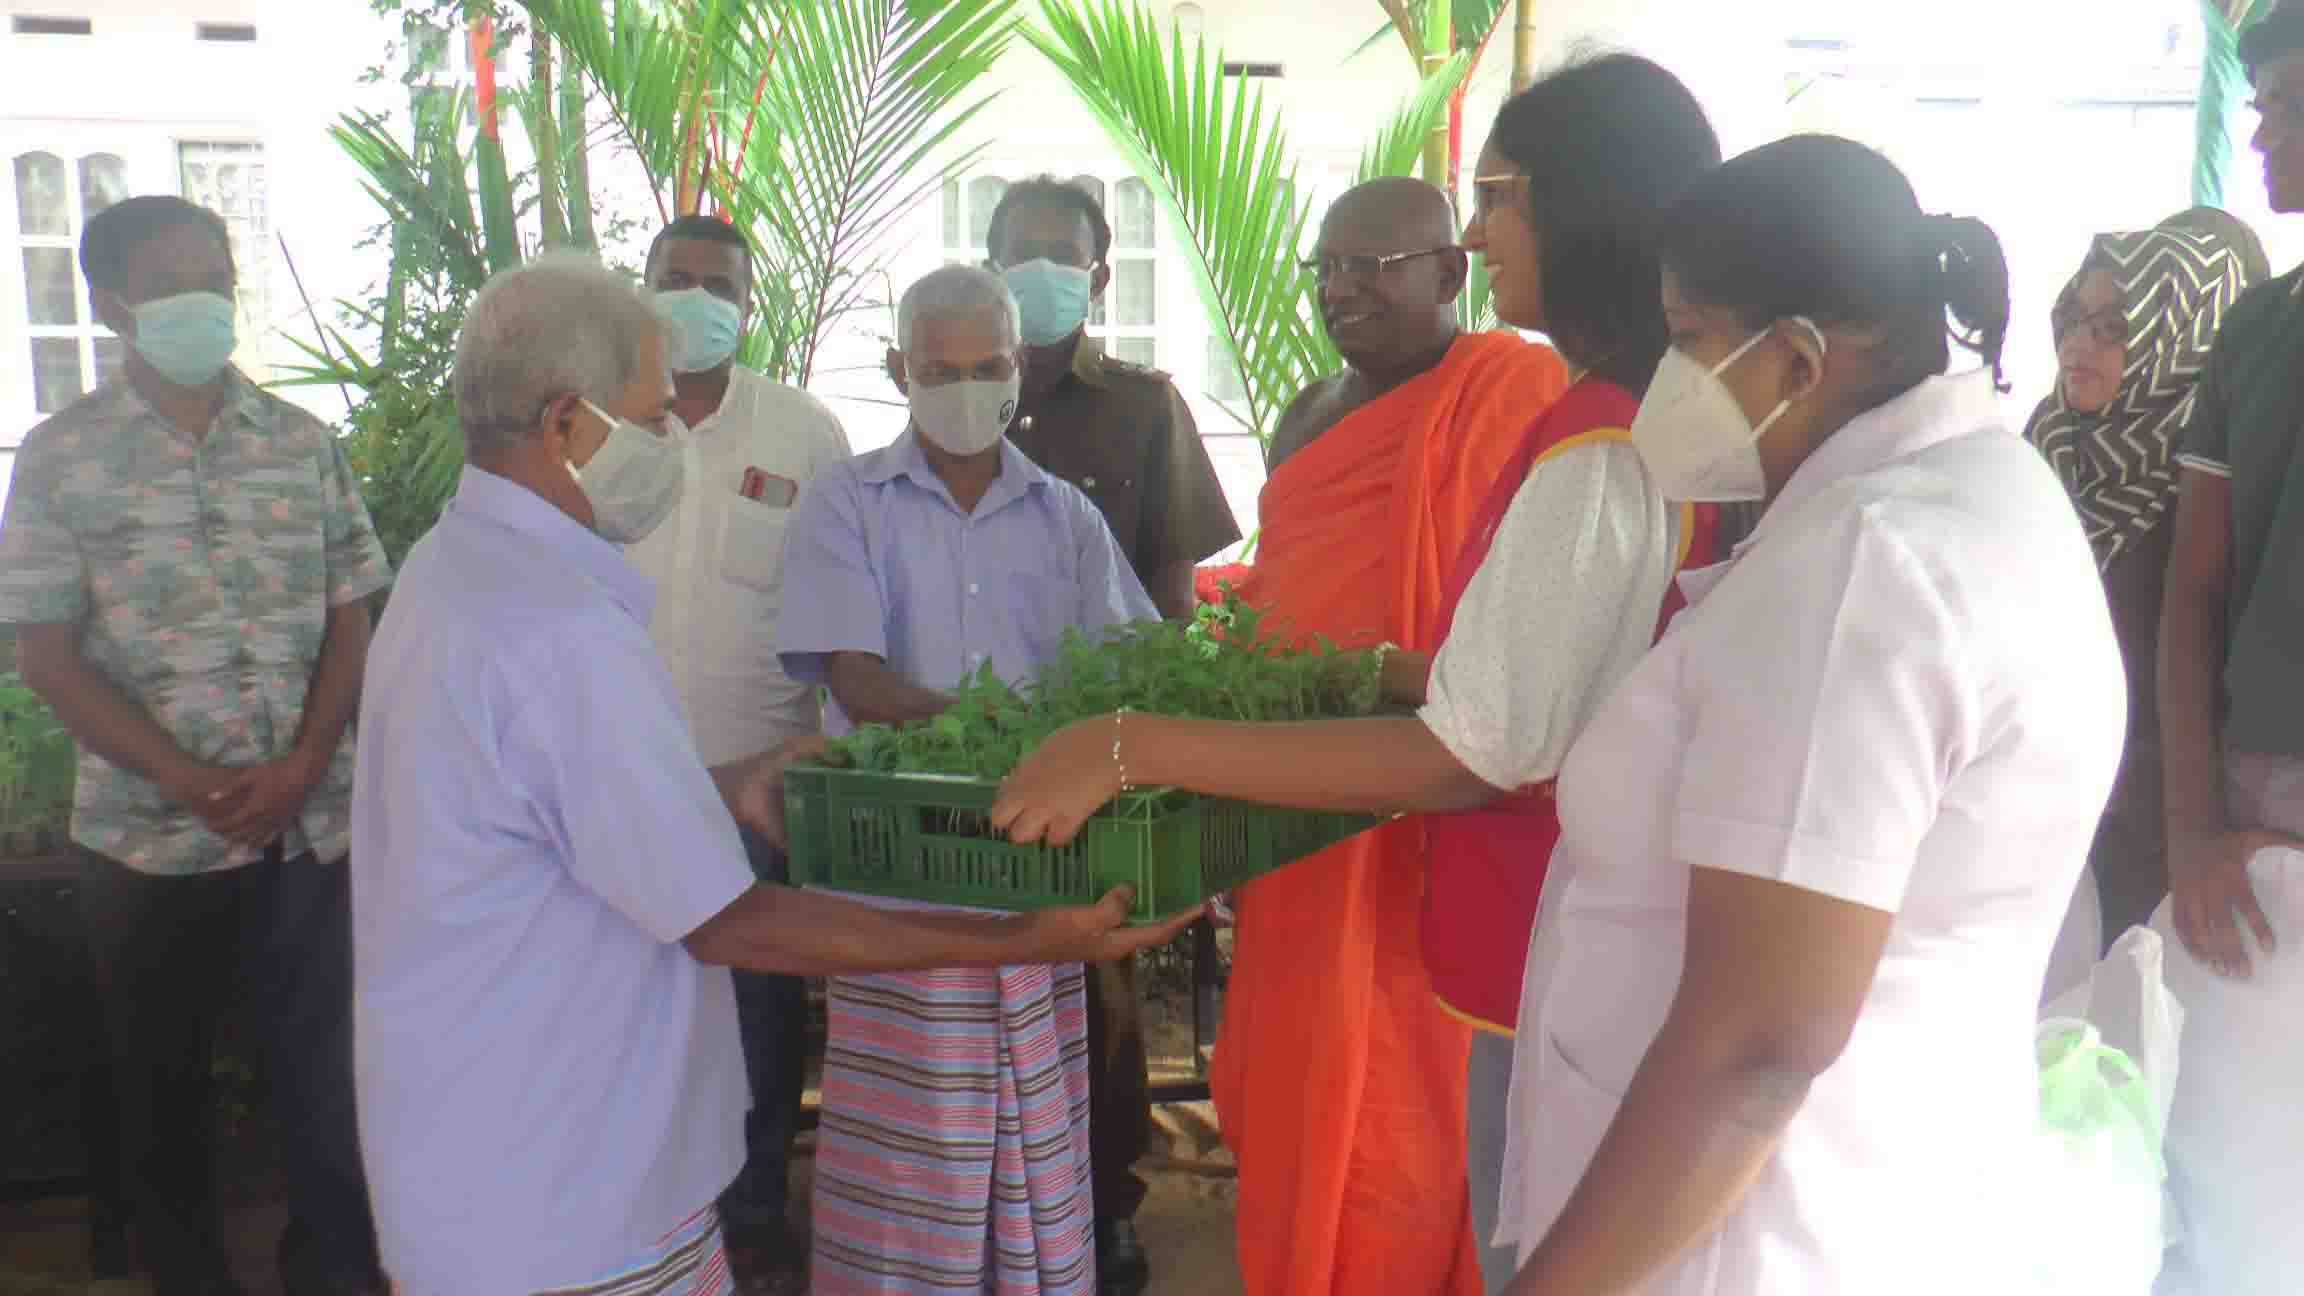 Distribution of vegetable seedlings, seeds, and organic fertilizers under Sahnoda Happy Green Project - Dehiwala